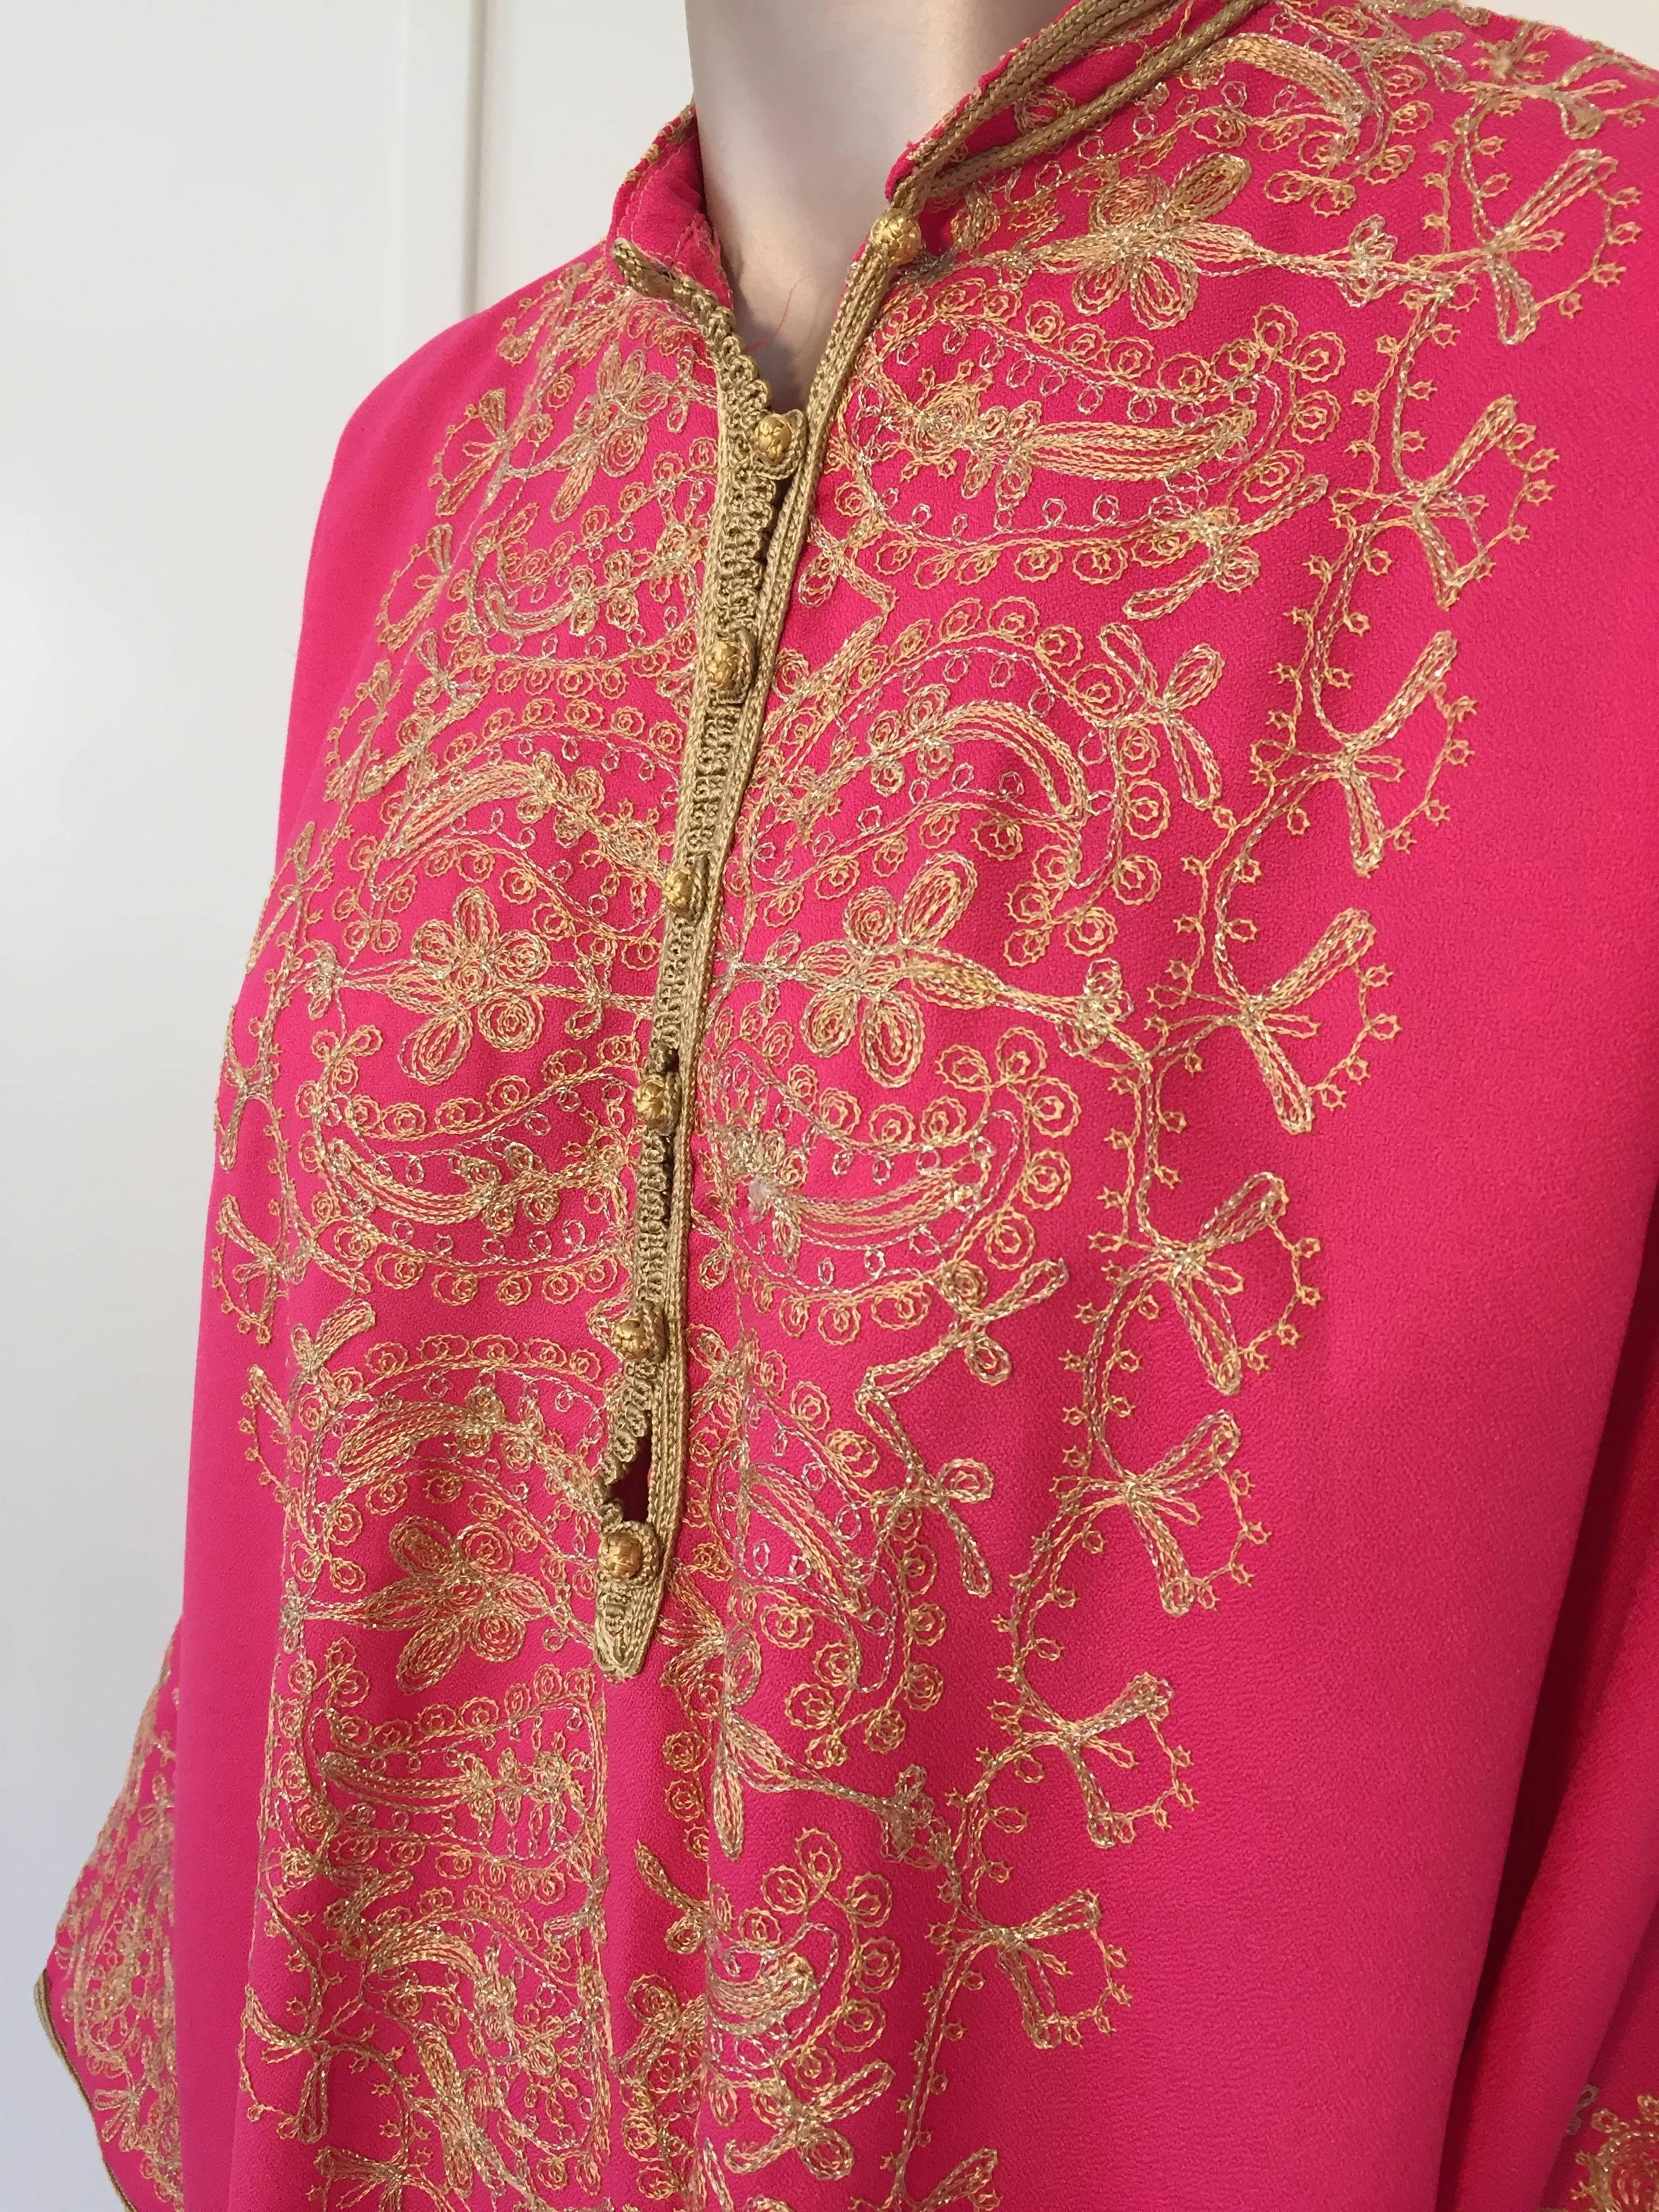 Moorish Moroccan Caftan Hot Pink with Gold Embroideries Size L